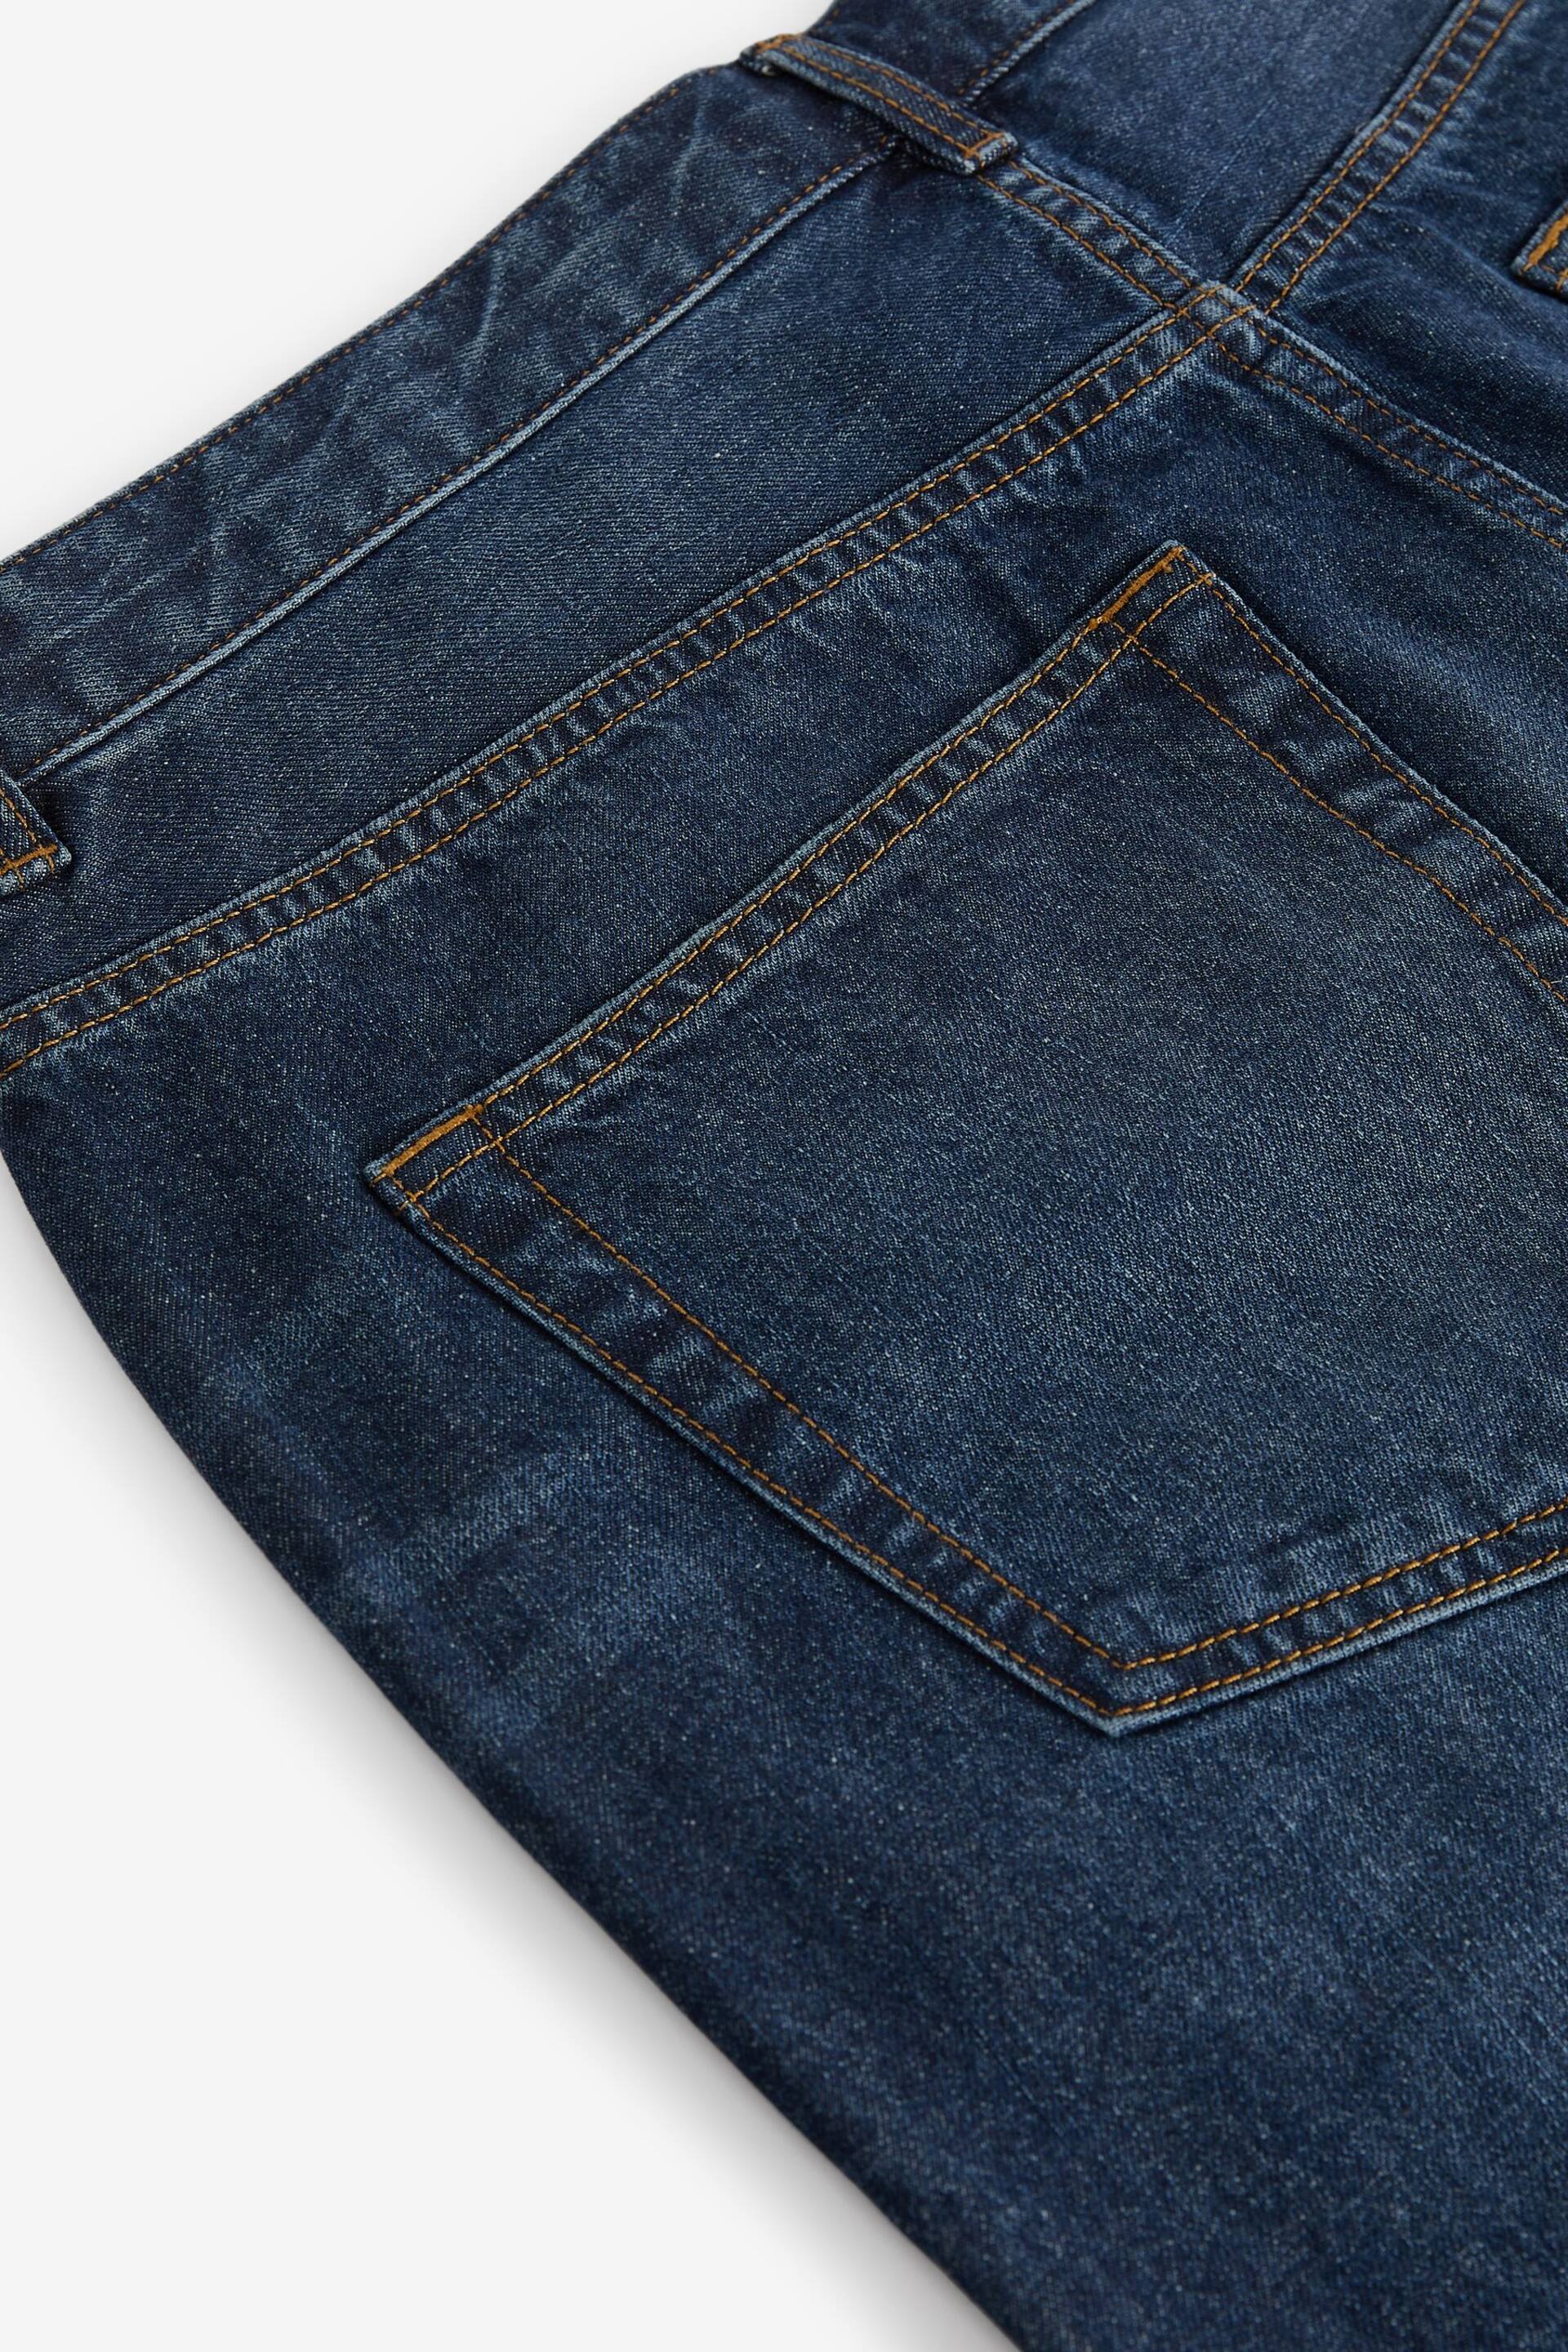 Blue Mid Relaxed Fit 100% Cotton Authentic Jeans - Image 10 of 12